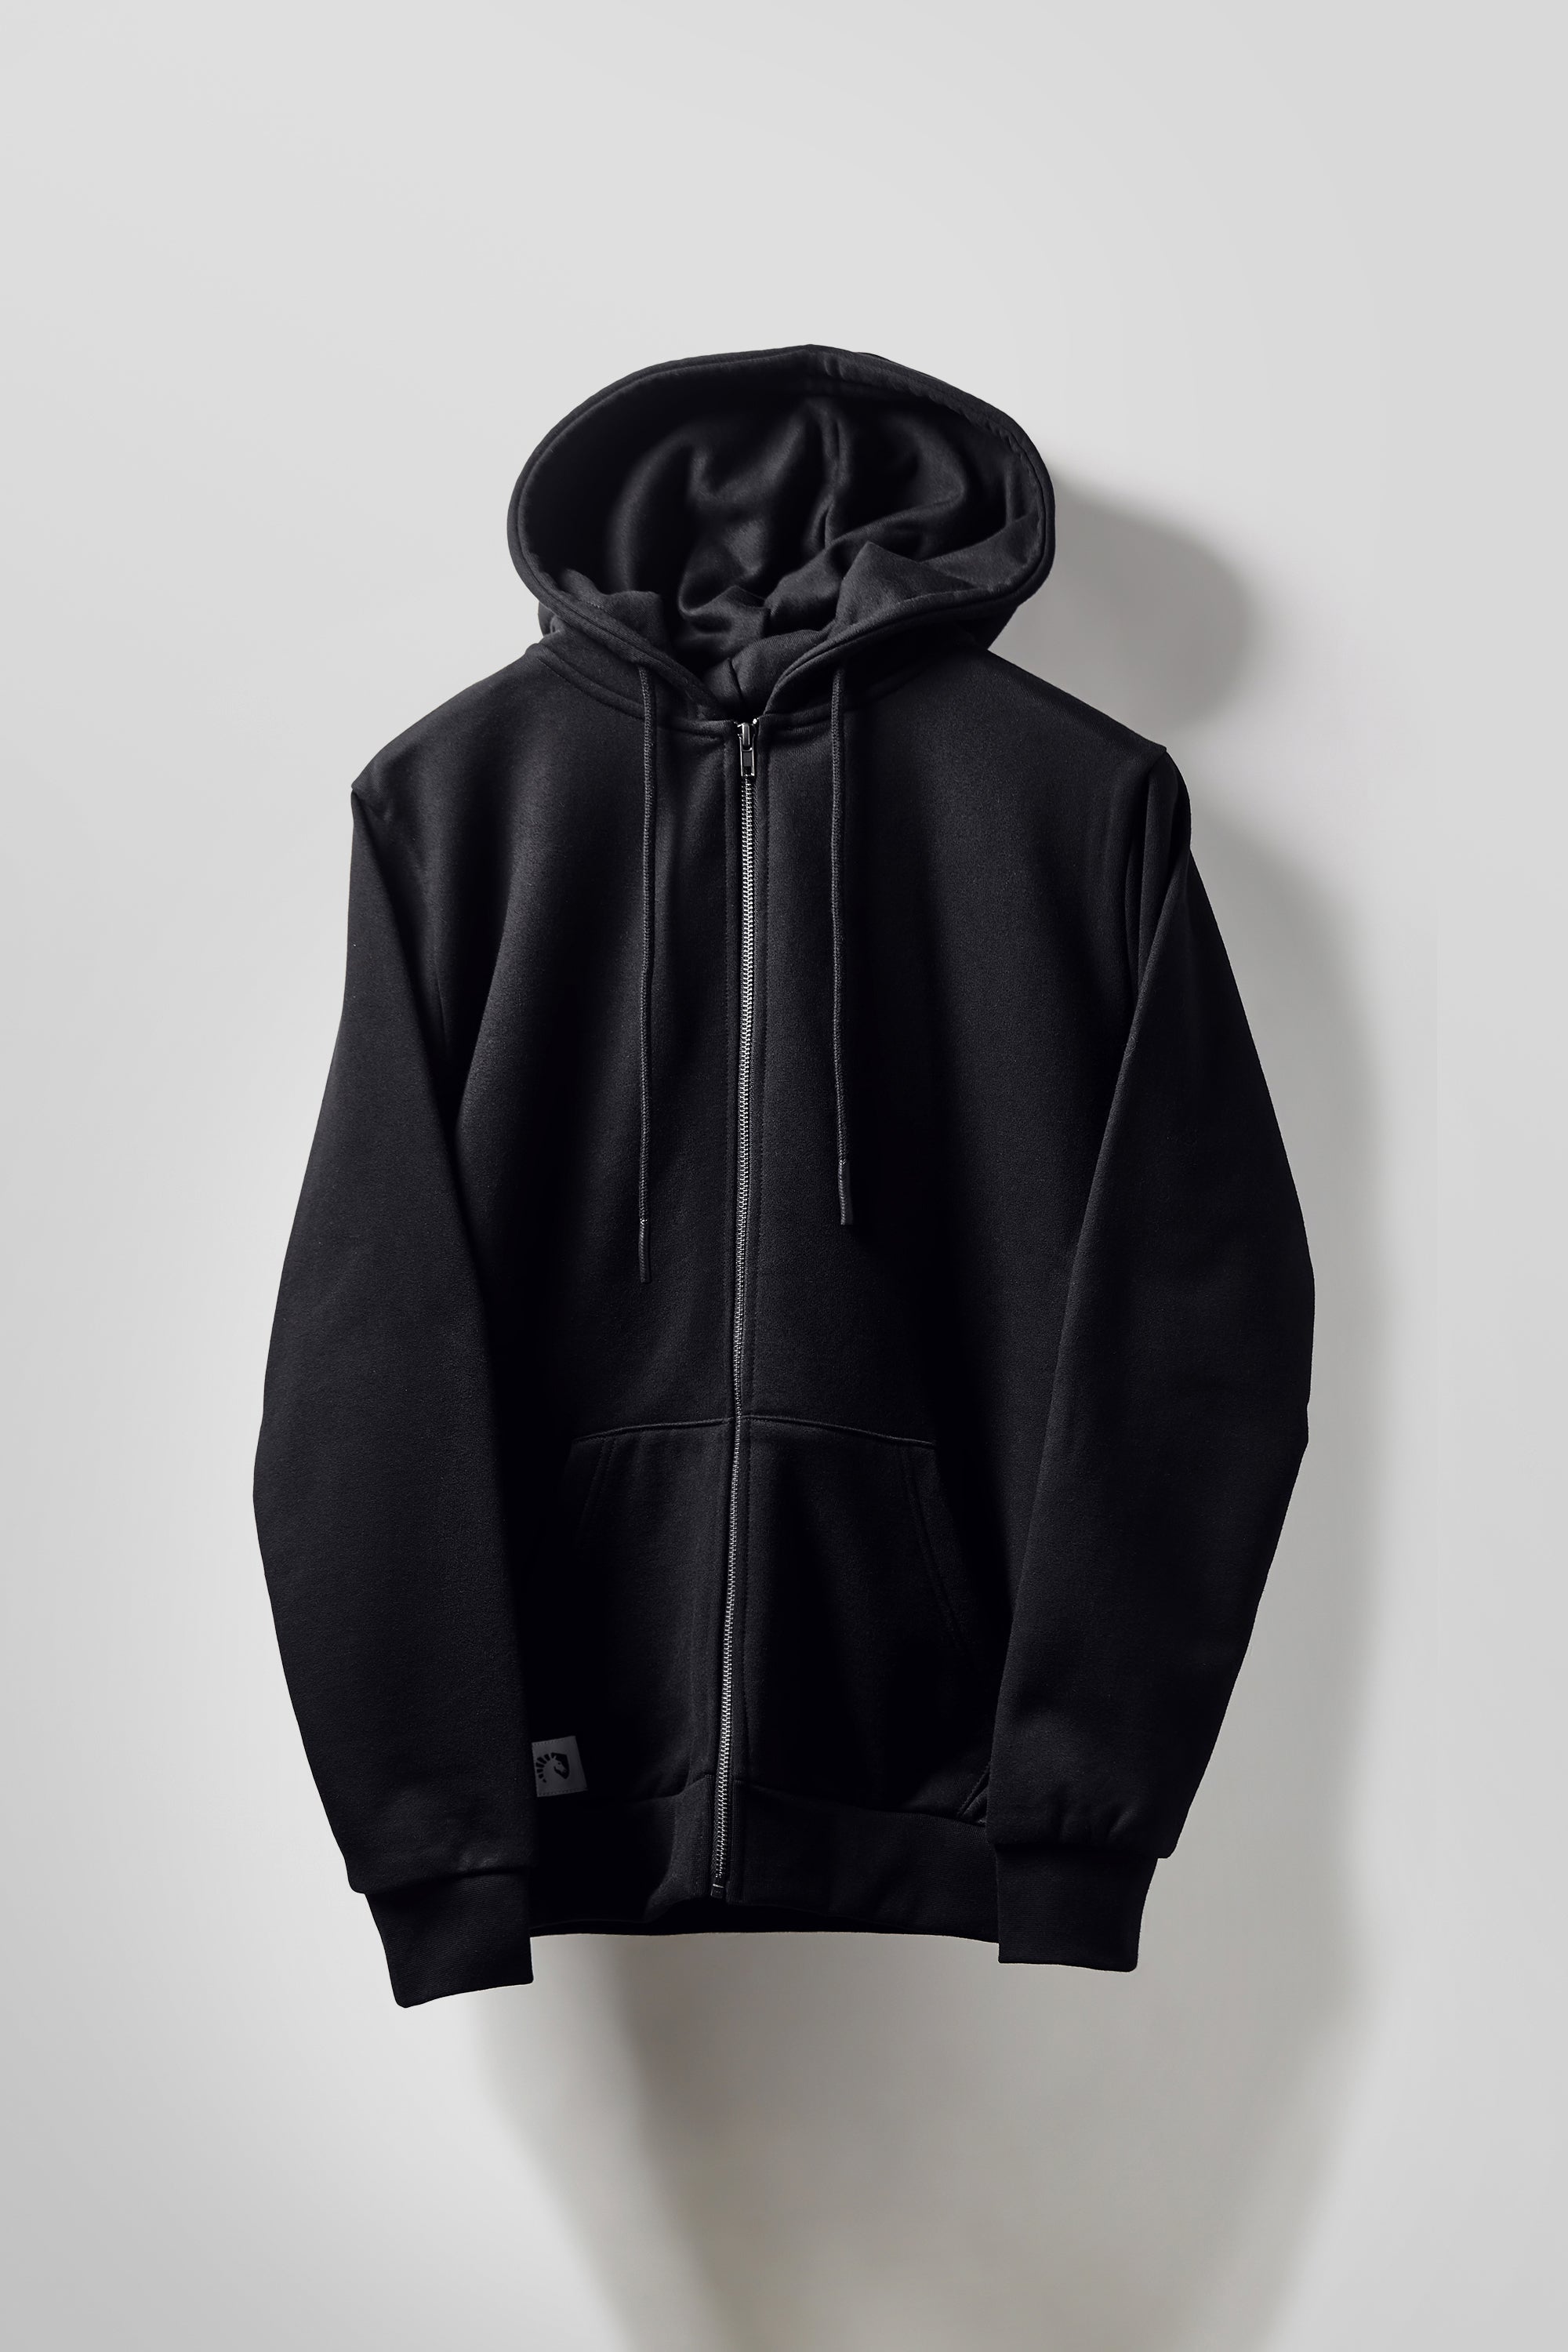 EMBROIDERED LOGO ZIP HOODIE